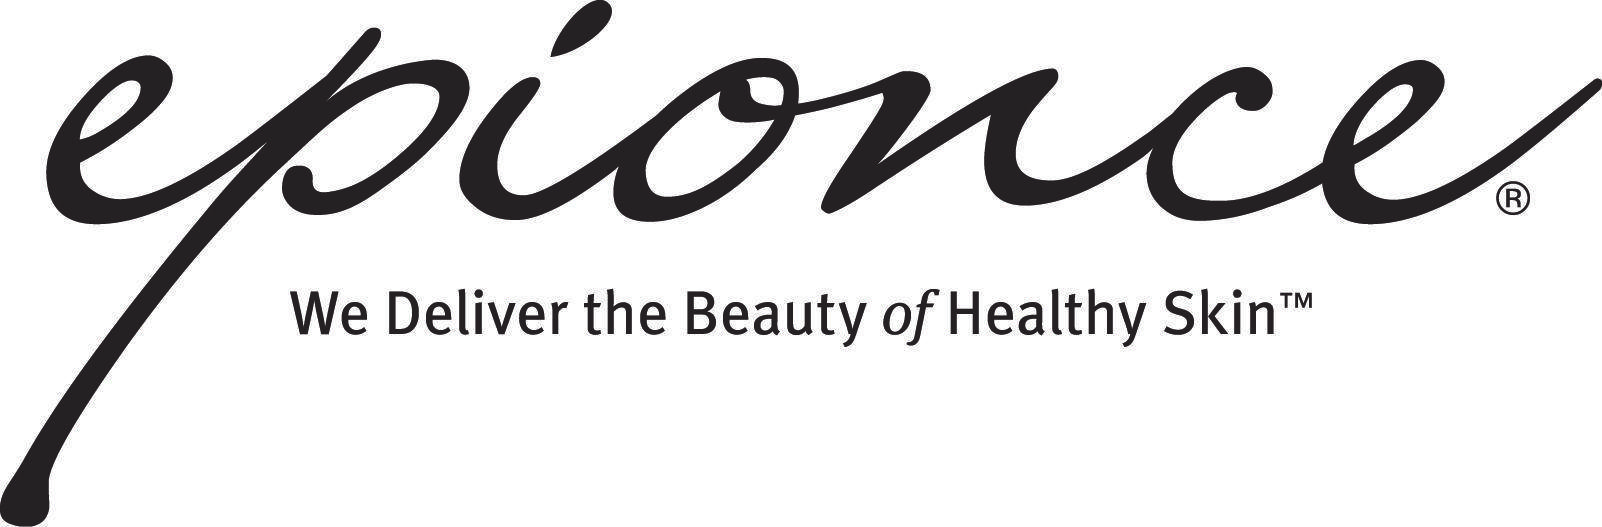 Epionce Logo - Love for the new Epionce logo | Products I Love | Skin Care ...